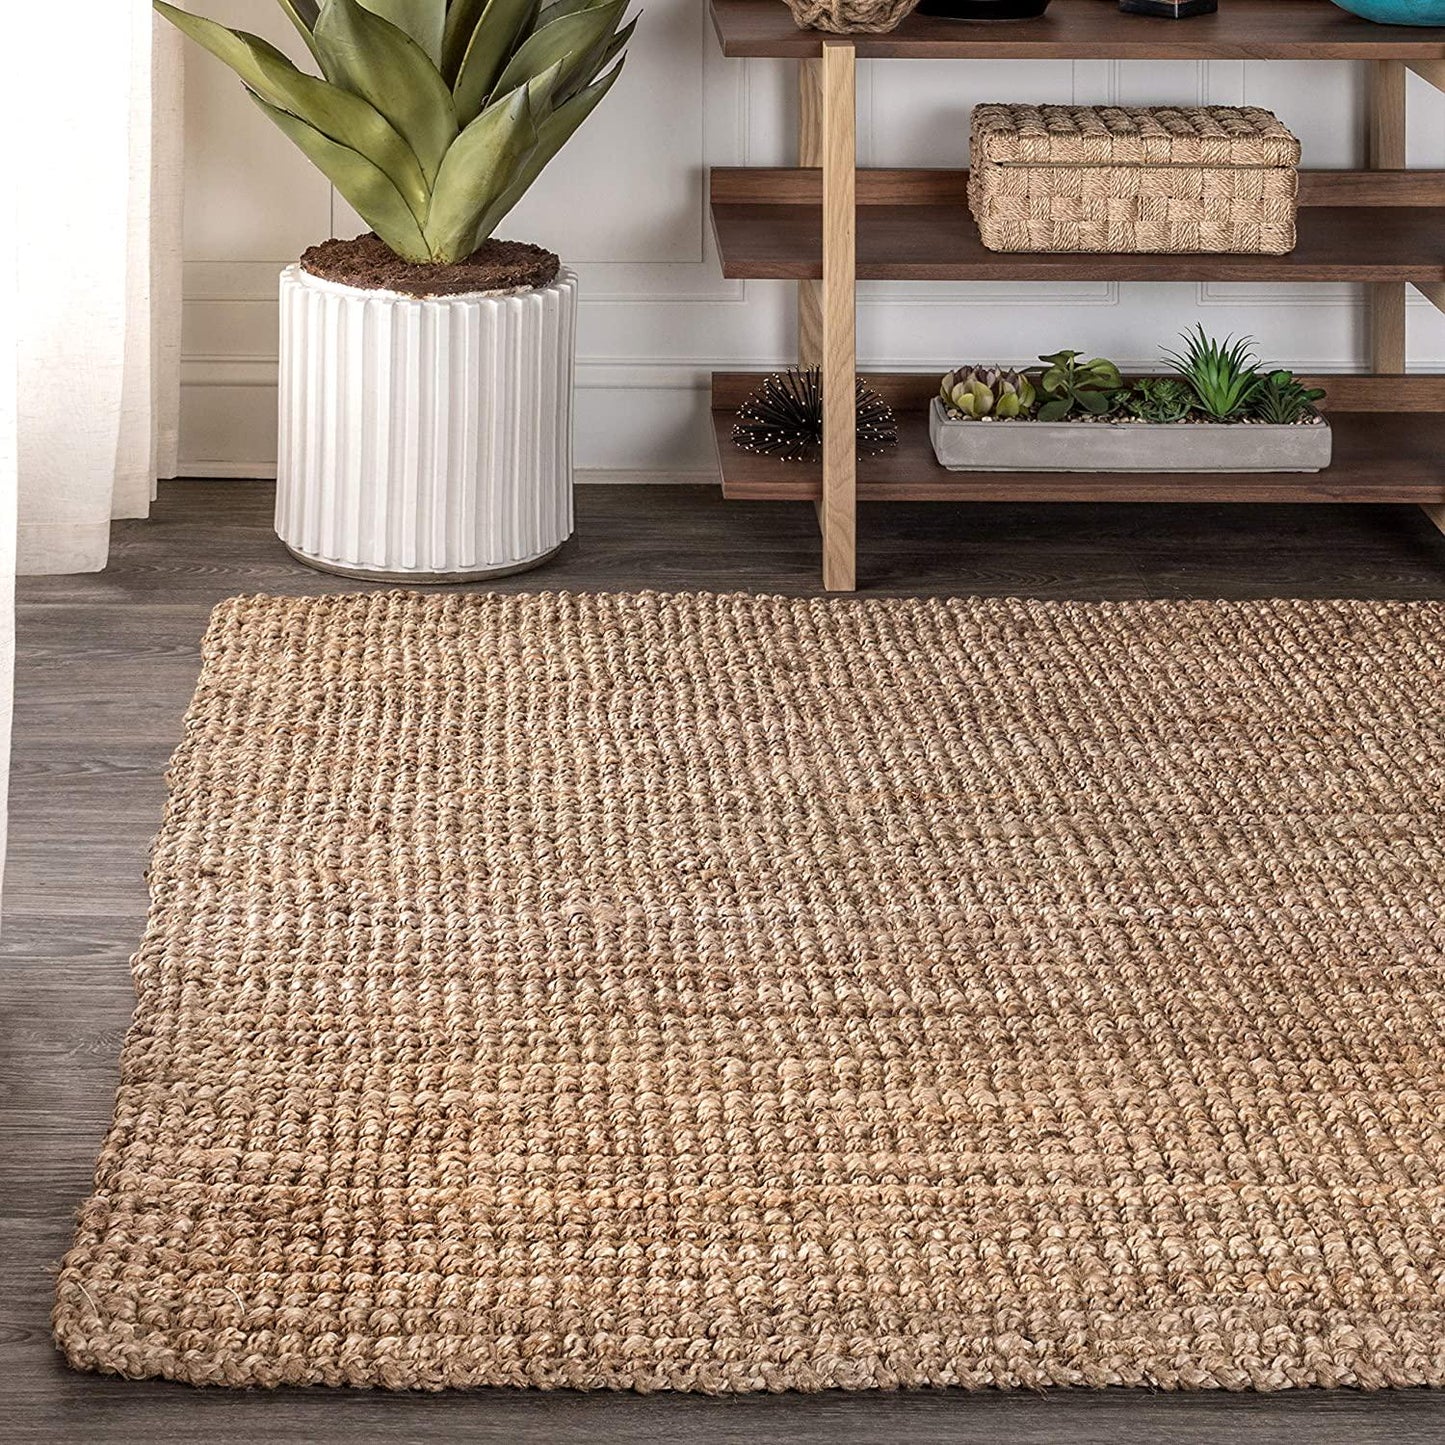 NRF102A-3 Pata Hand Woven Chunky Jute Indoor Area Rug Bohemian Farmhouse Easy Cleaning Bedroom Kitchen Living Room Non Shedding, 3 ft x 5 ft, Natural Color